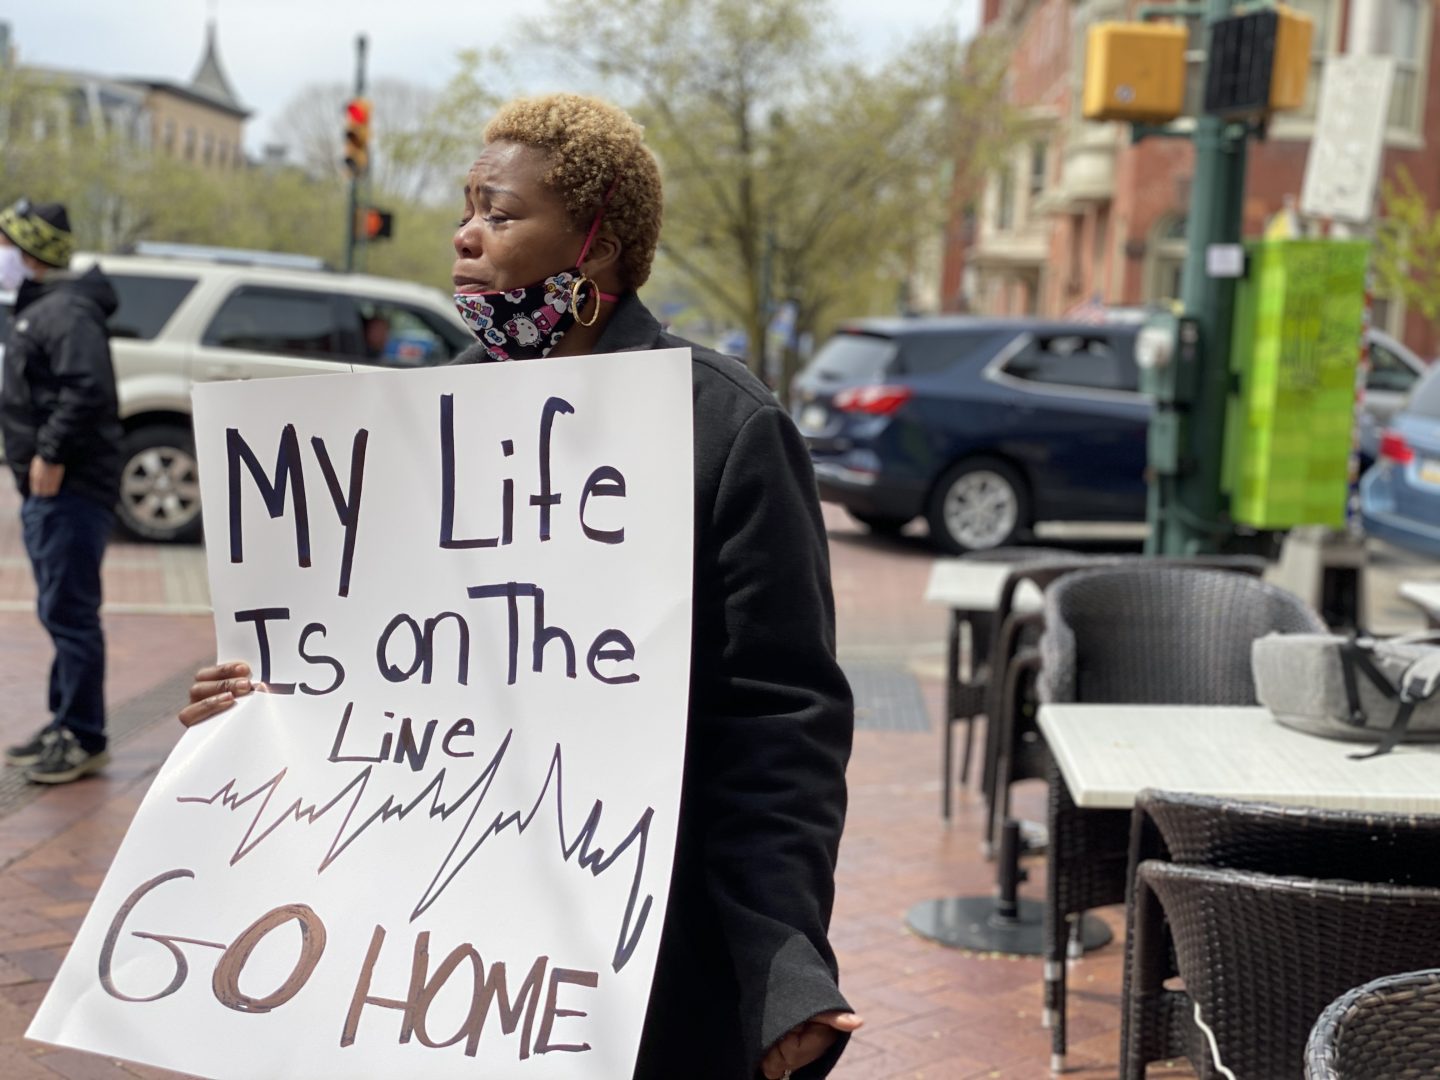 Yetta Timothy, a certified nursing assistant in Harrisburg, was among a small group of health care workers who showed up to counter-protest the larger April 20, 2020, rally urging the quick reopening of Pennsylvania's economy.